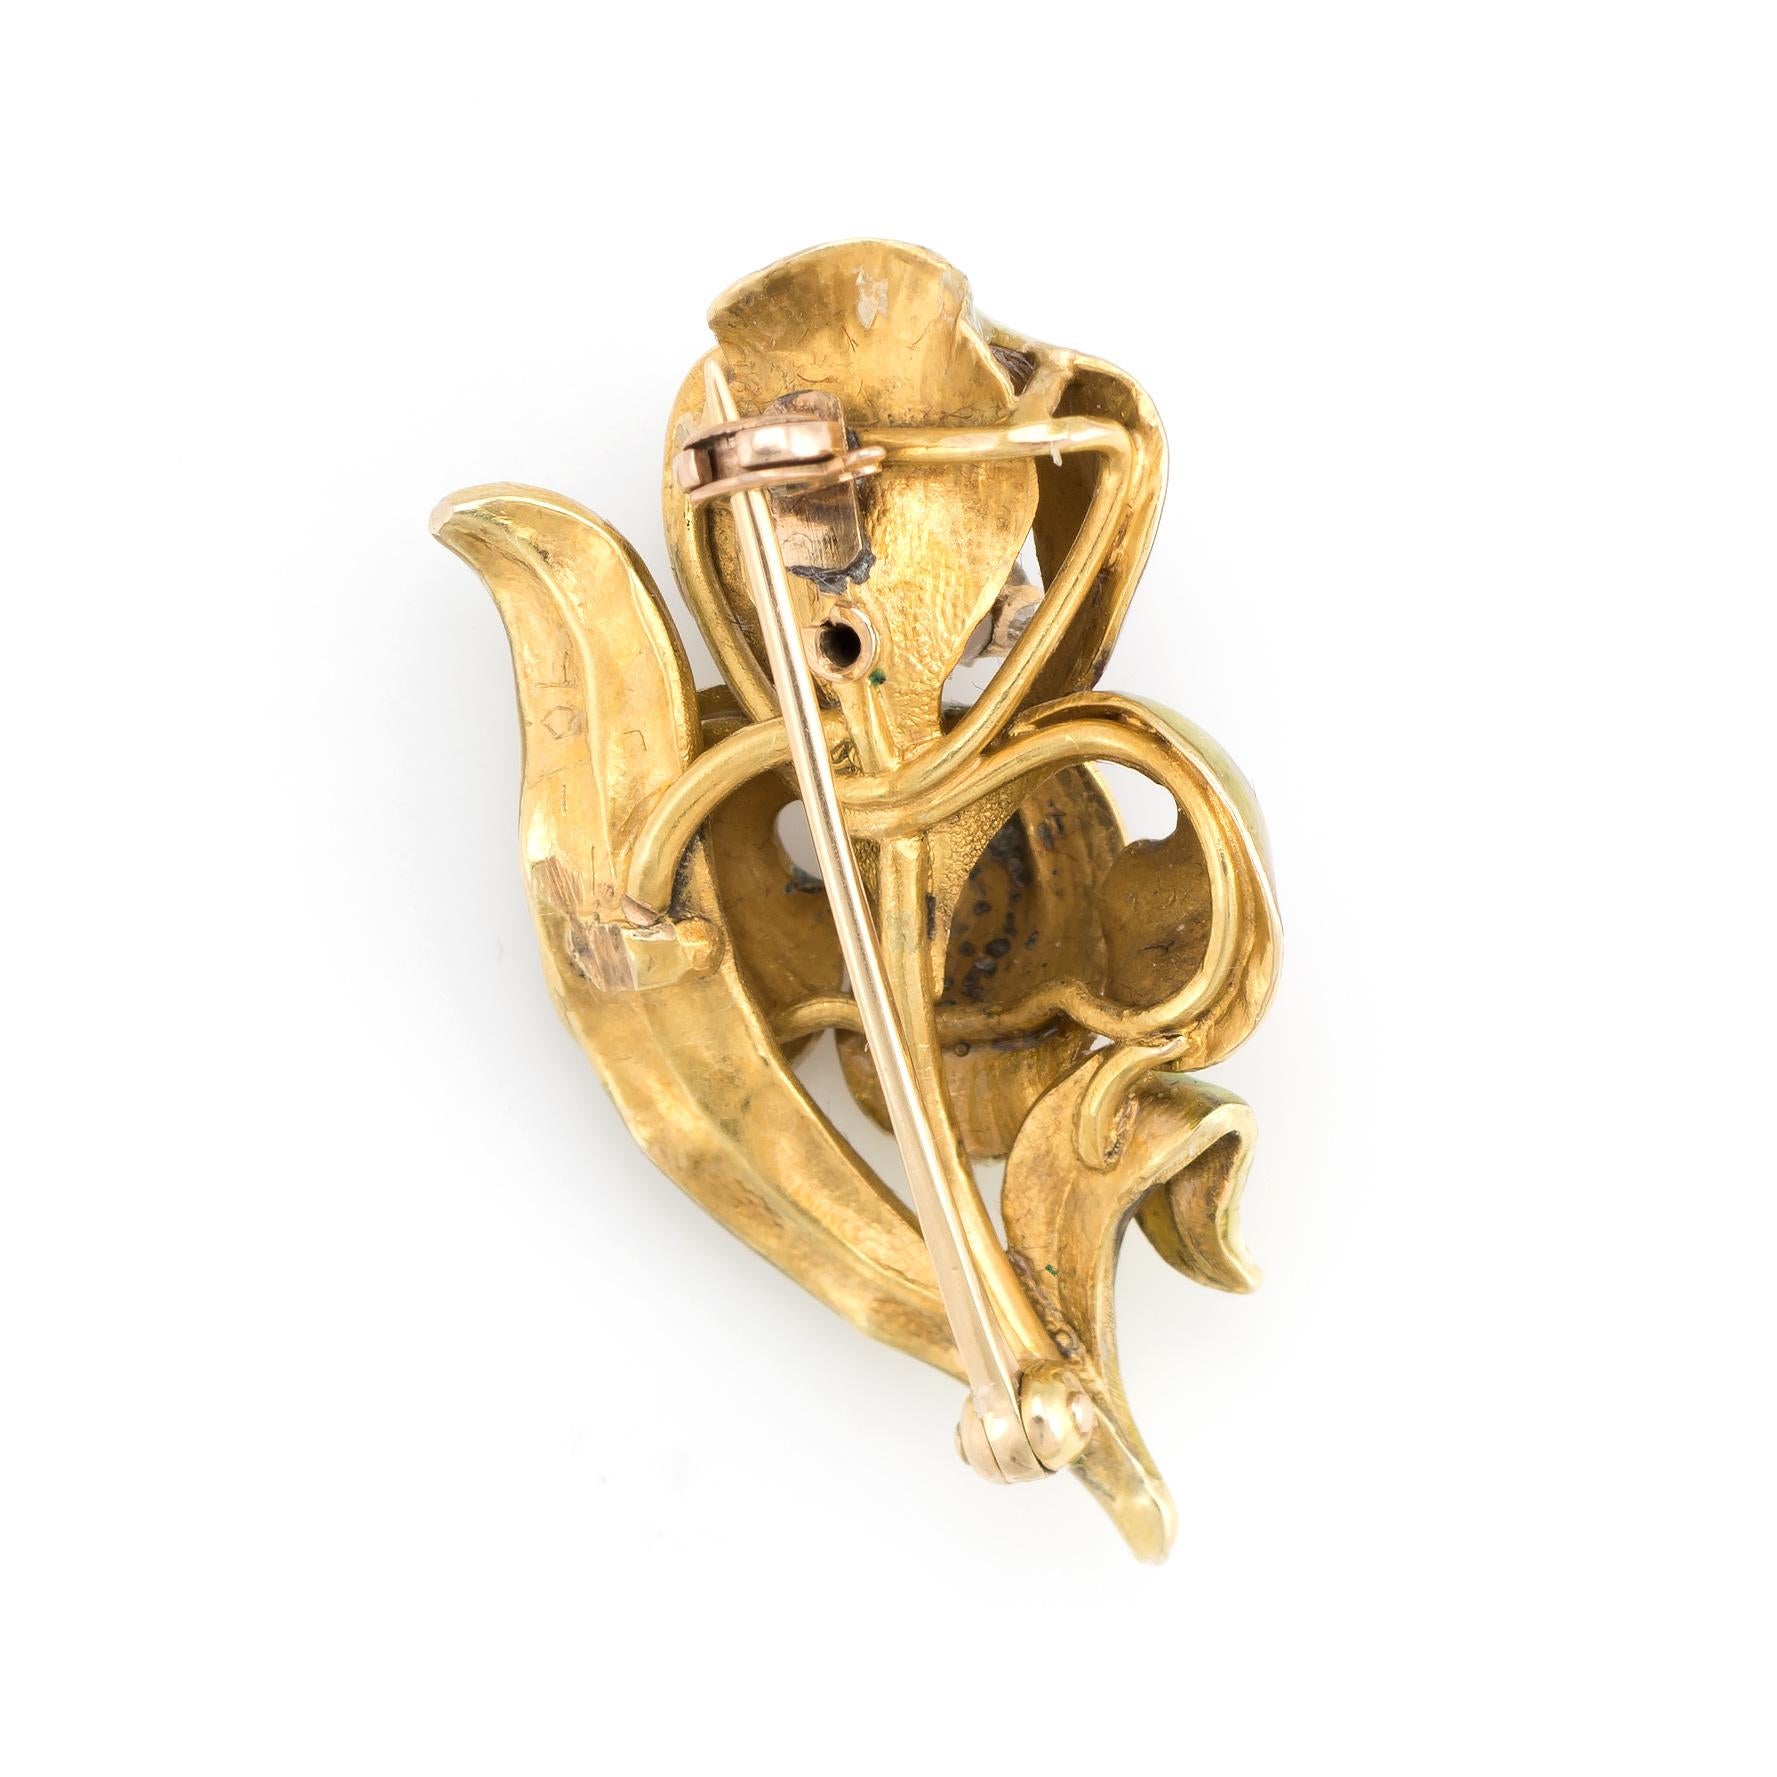 Enchanting antique Art Nouveau Iris brooch (circa 1900s to 1910s), crafted in 14 karat yellow gold. 

One old mine cut diamond is estimated at 0.05 carats (estimated at I-J color and SI2 clarity). 

The stylized Iris features lifelike detail with